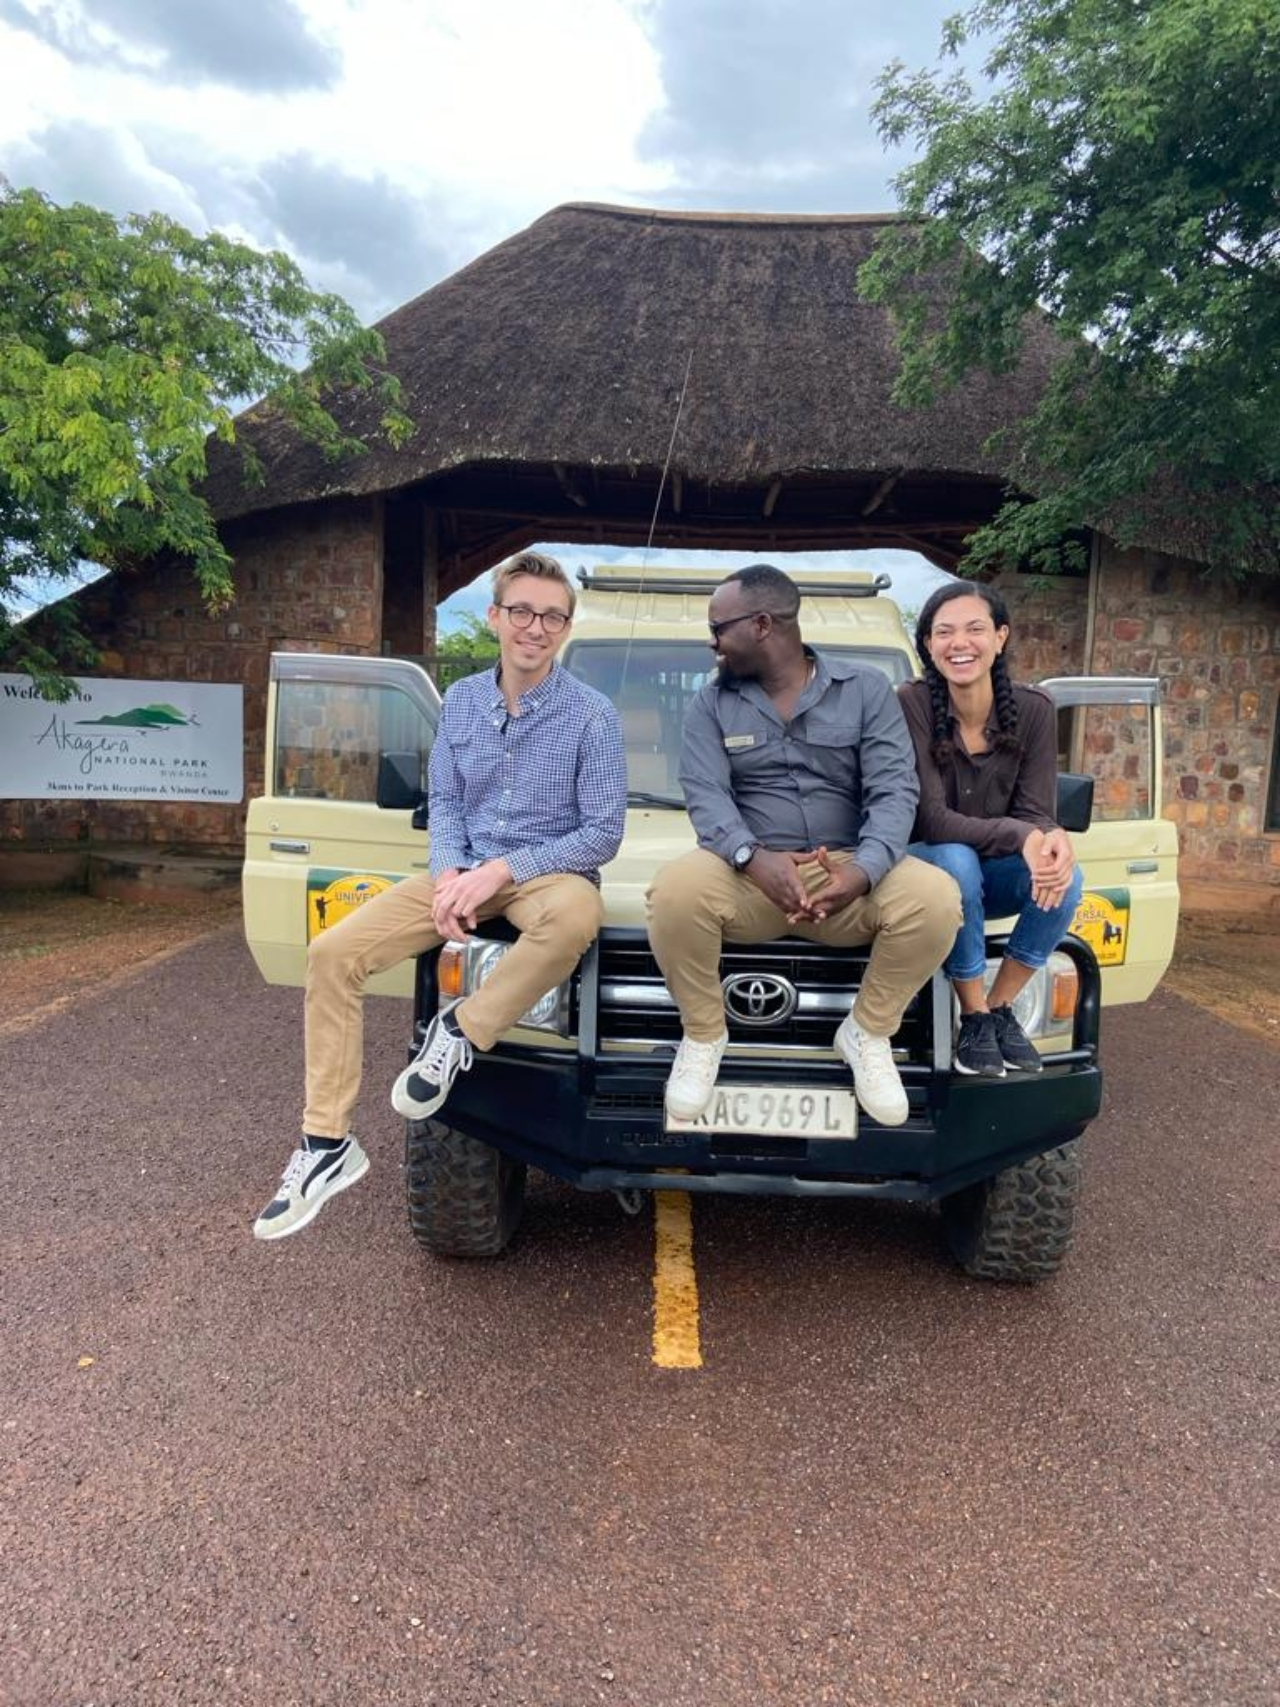 1 Day akagera national park adventure, 1 day tour to akagera, 1 day akagera adventure, 1 day tour in akagera, akagera safari for 1 day, one day tour to akagera, one-day trip to akagera national park, one-day safari in akagera park, one-day adventure in akagera, akagera one-day adventure, akagera tour for 1 day, akagera game drive 1 day